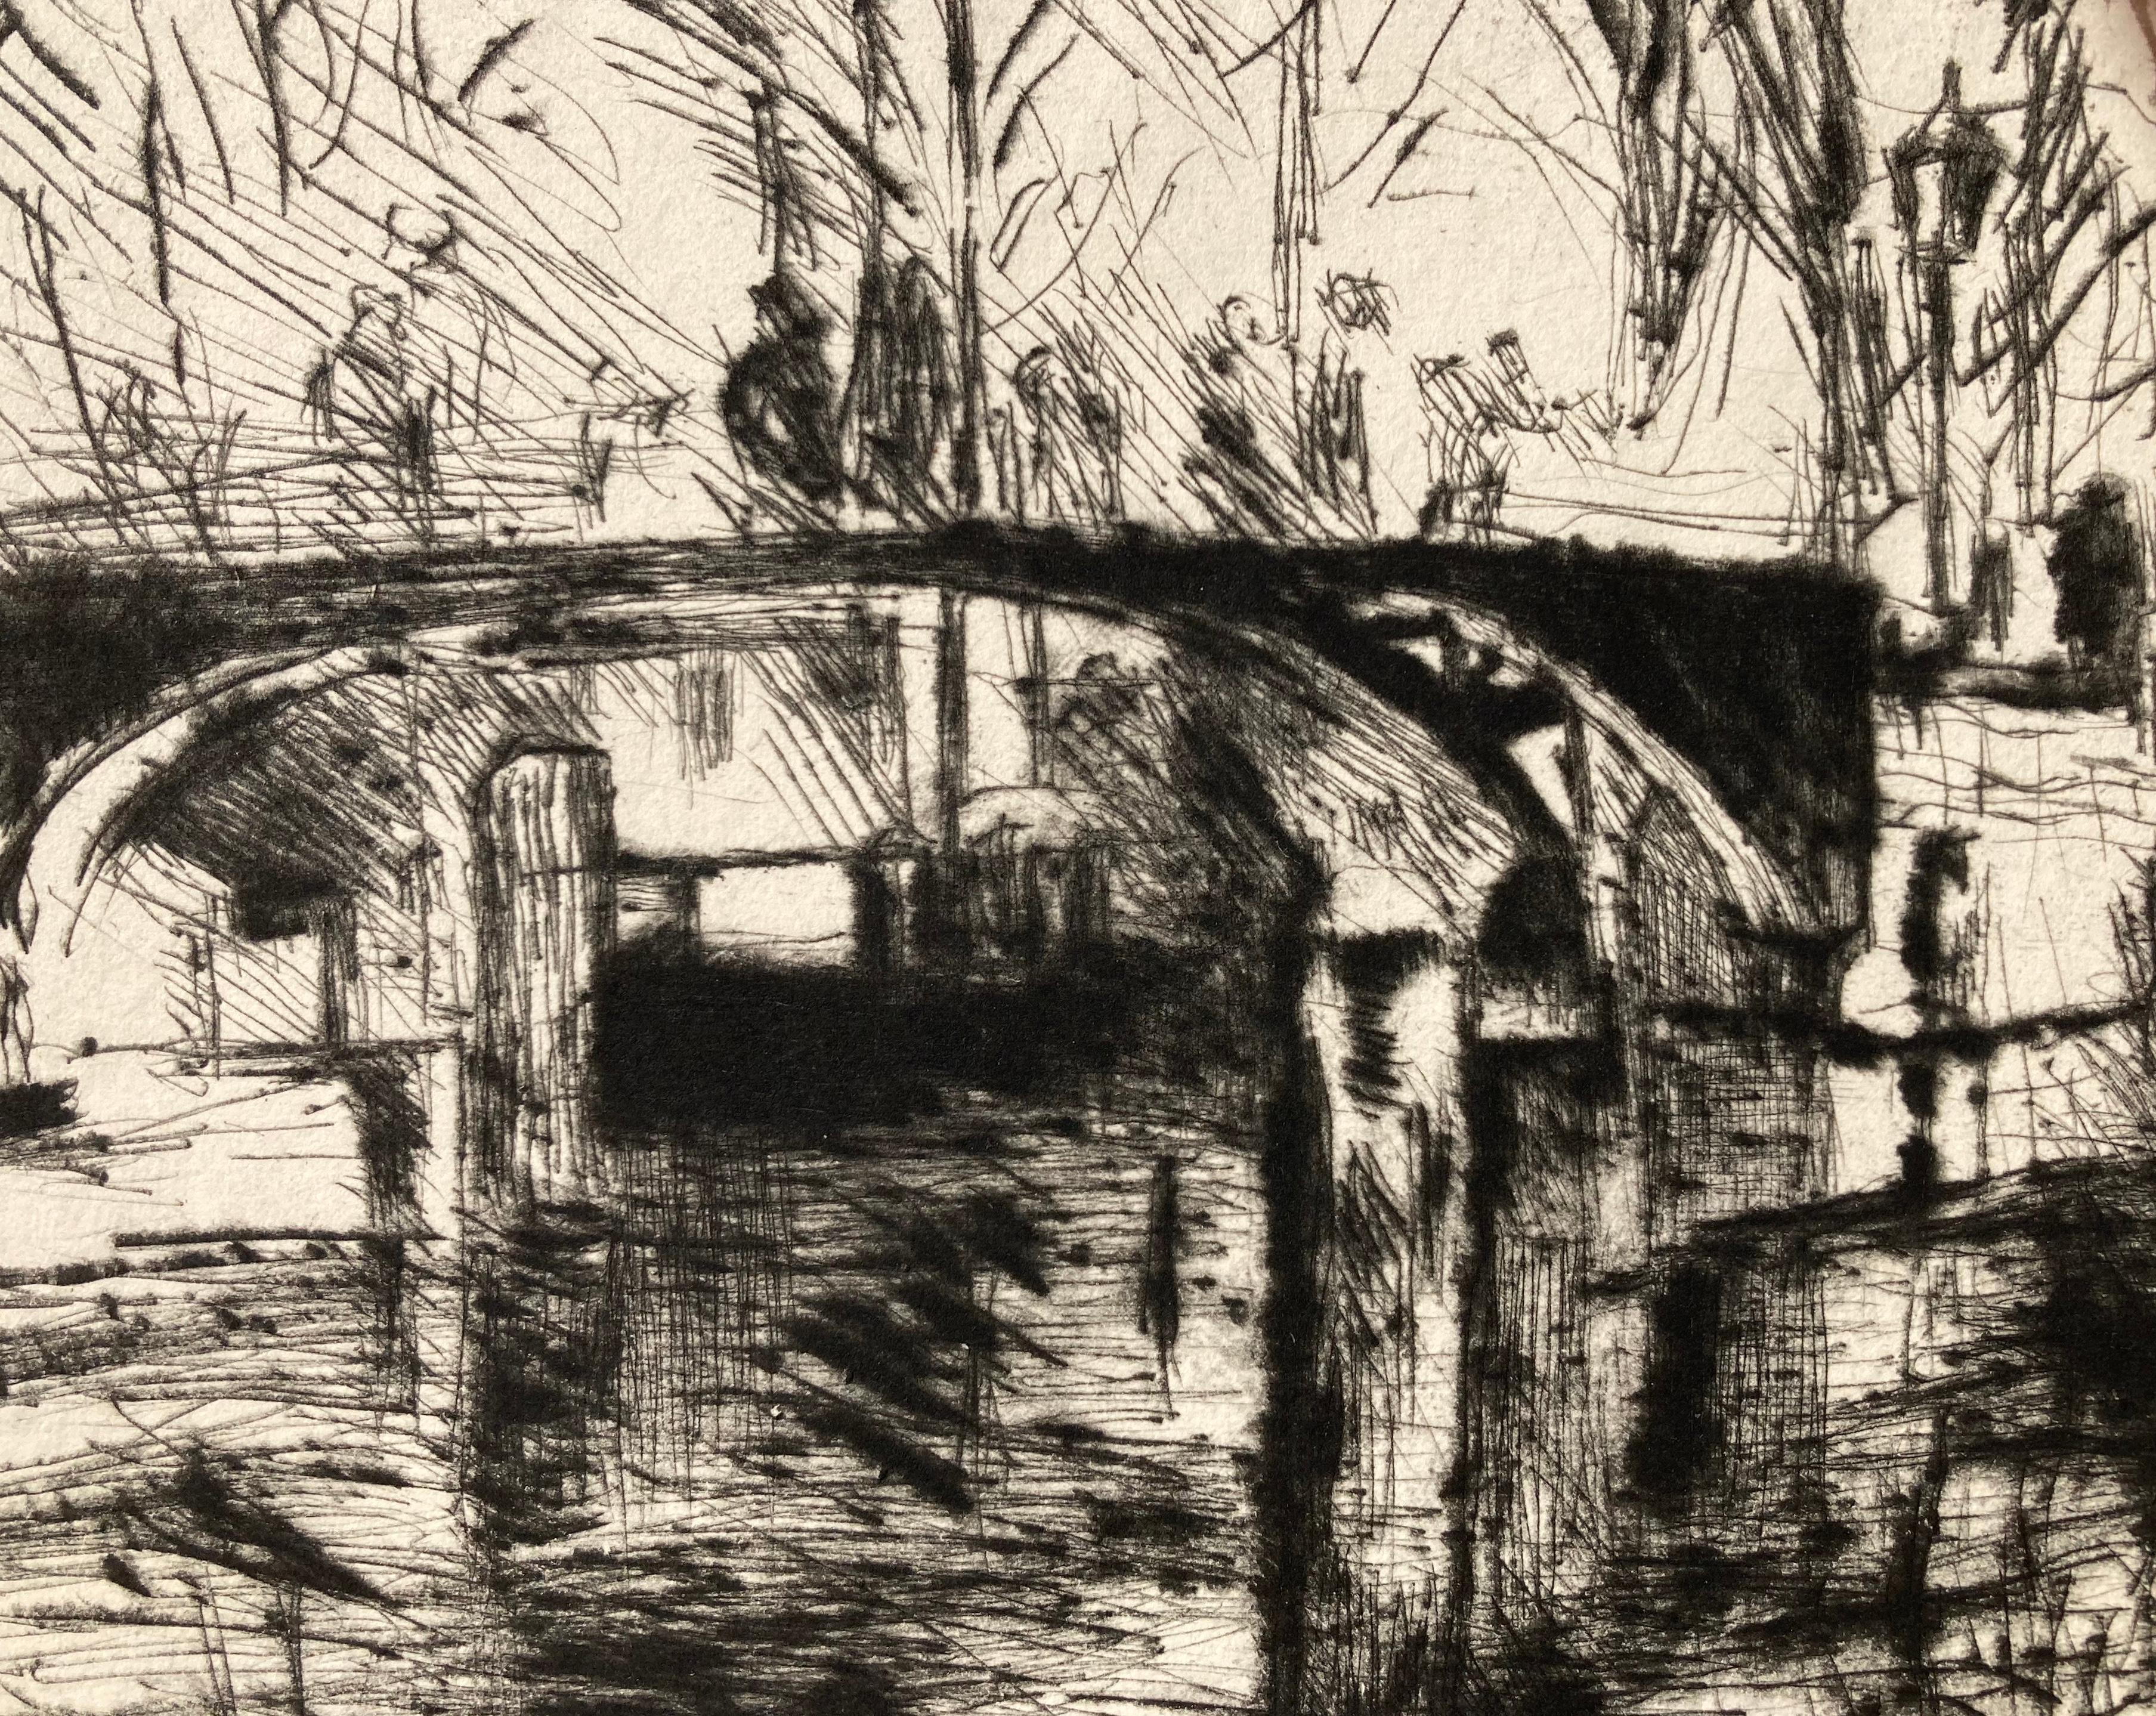 LOVIS CORINTH (1858-1925)

AUS DEM TIERGARTEN 1920 (Schwartz 397)
Drypoint, signed and numbered 47/50. BEAUTIFUL IMPRESSION with RICH DRYPOINT.  Plate 9 ½ x 12 ½ inches. Full margins with deckle edges, sheet 11 ¼ x 13 ¾ inches.. Printed by E. A.